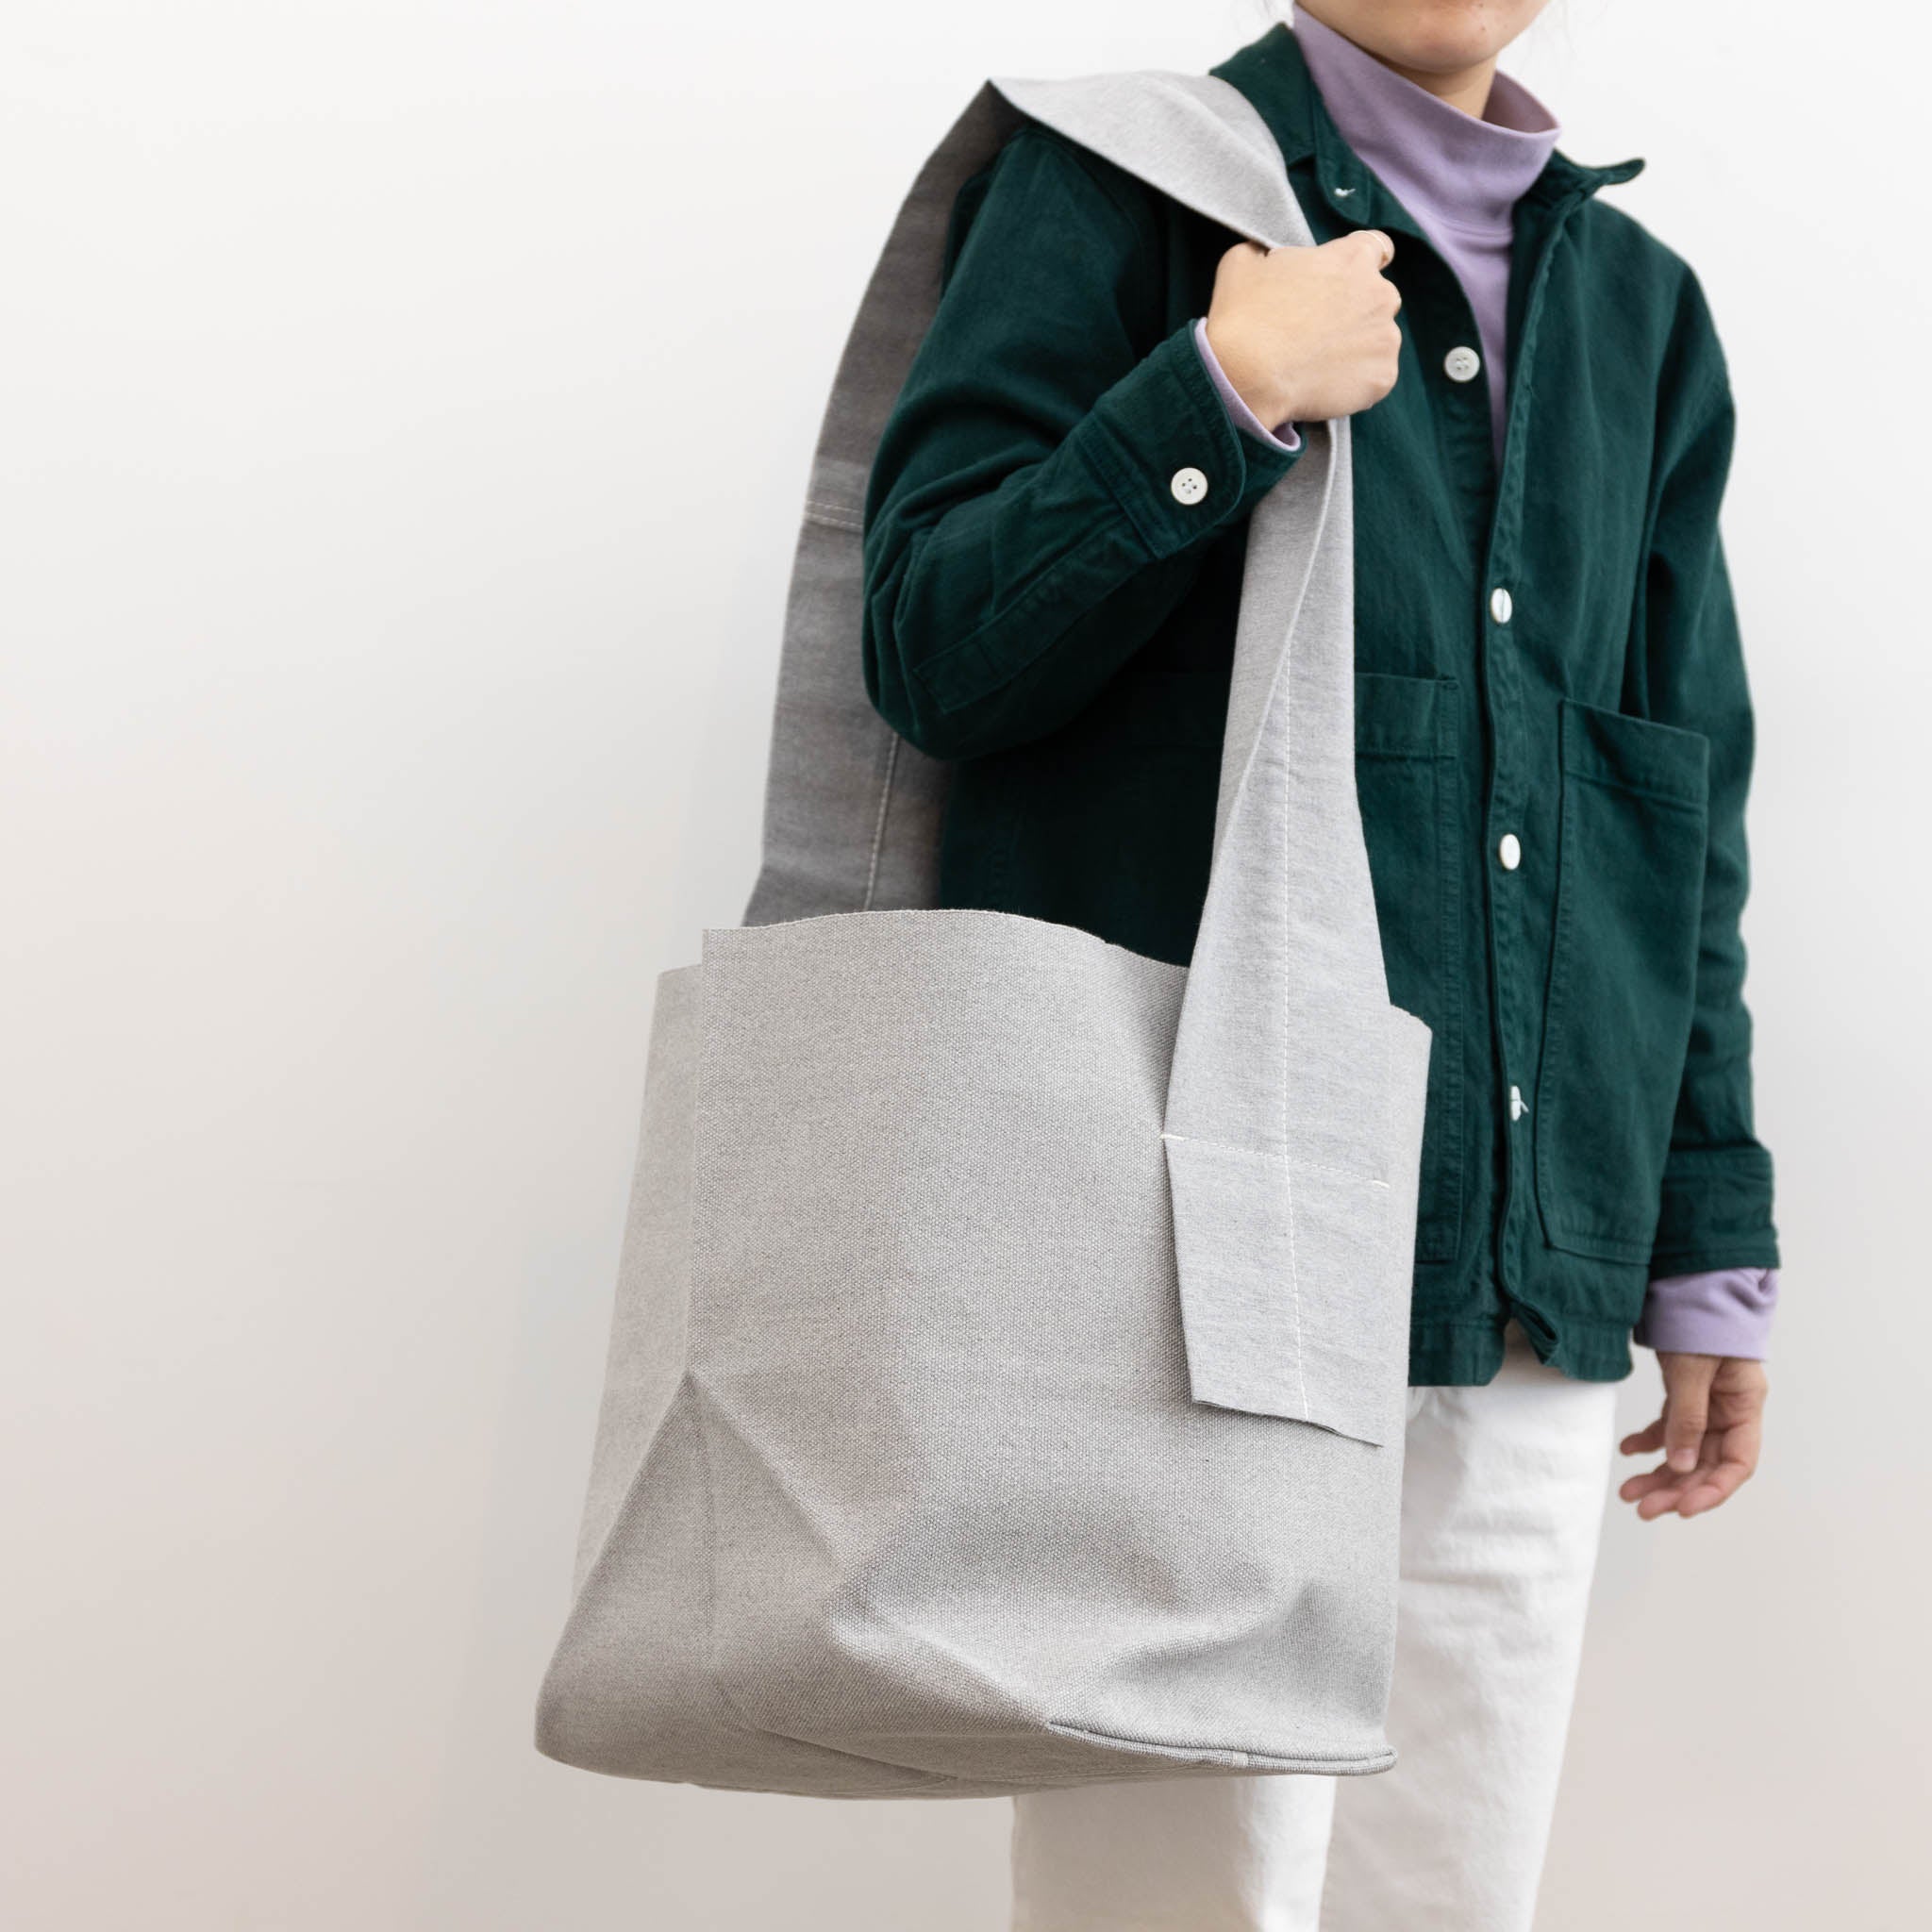 Origami Tote Bag With Pocket